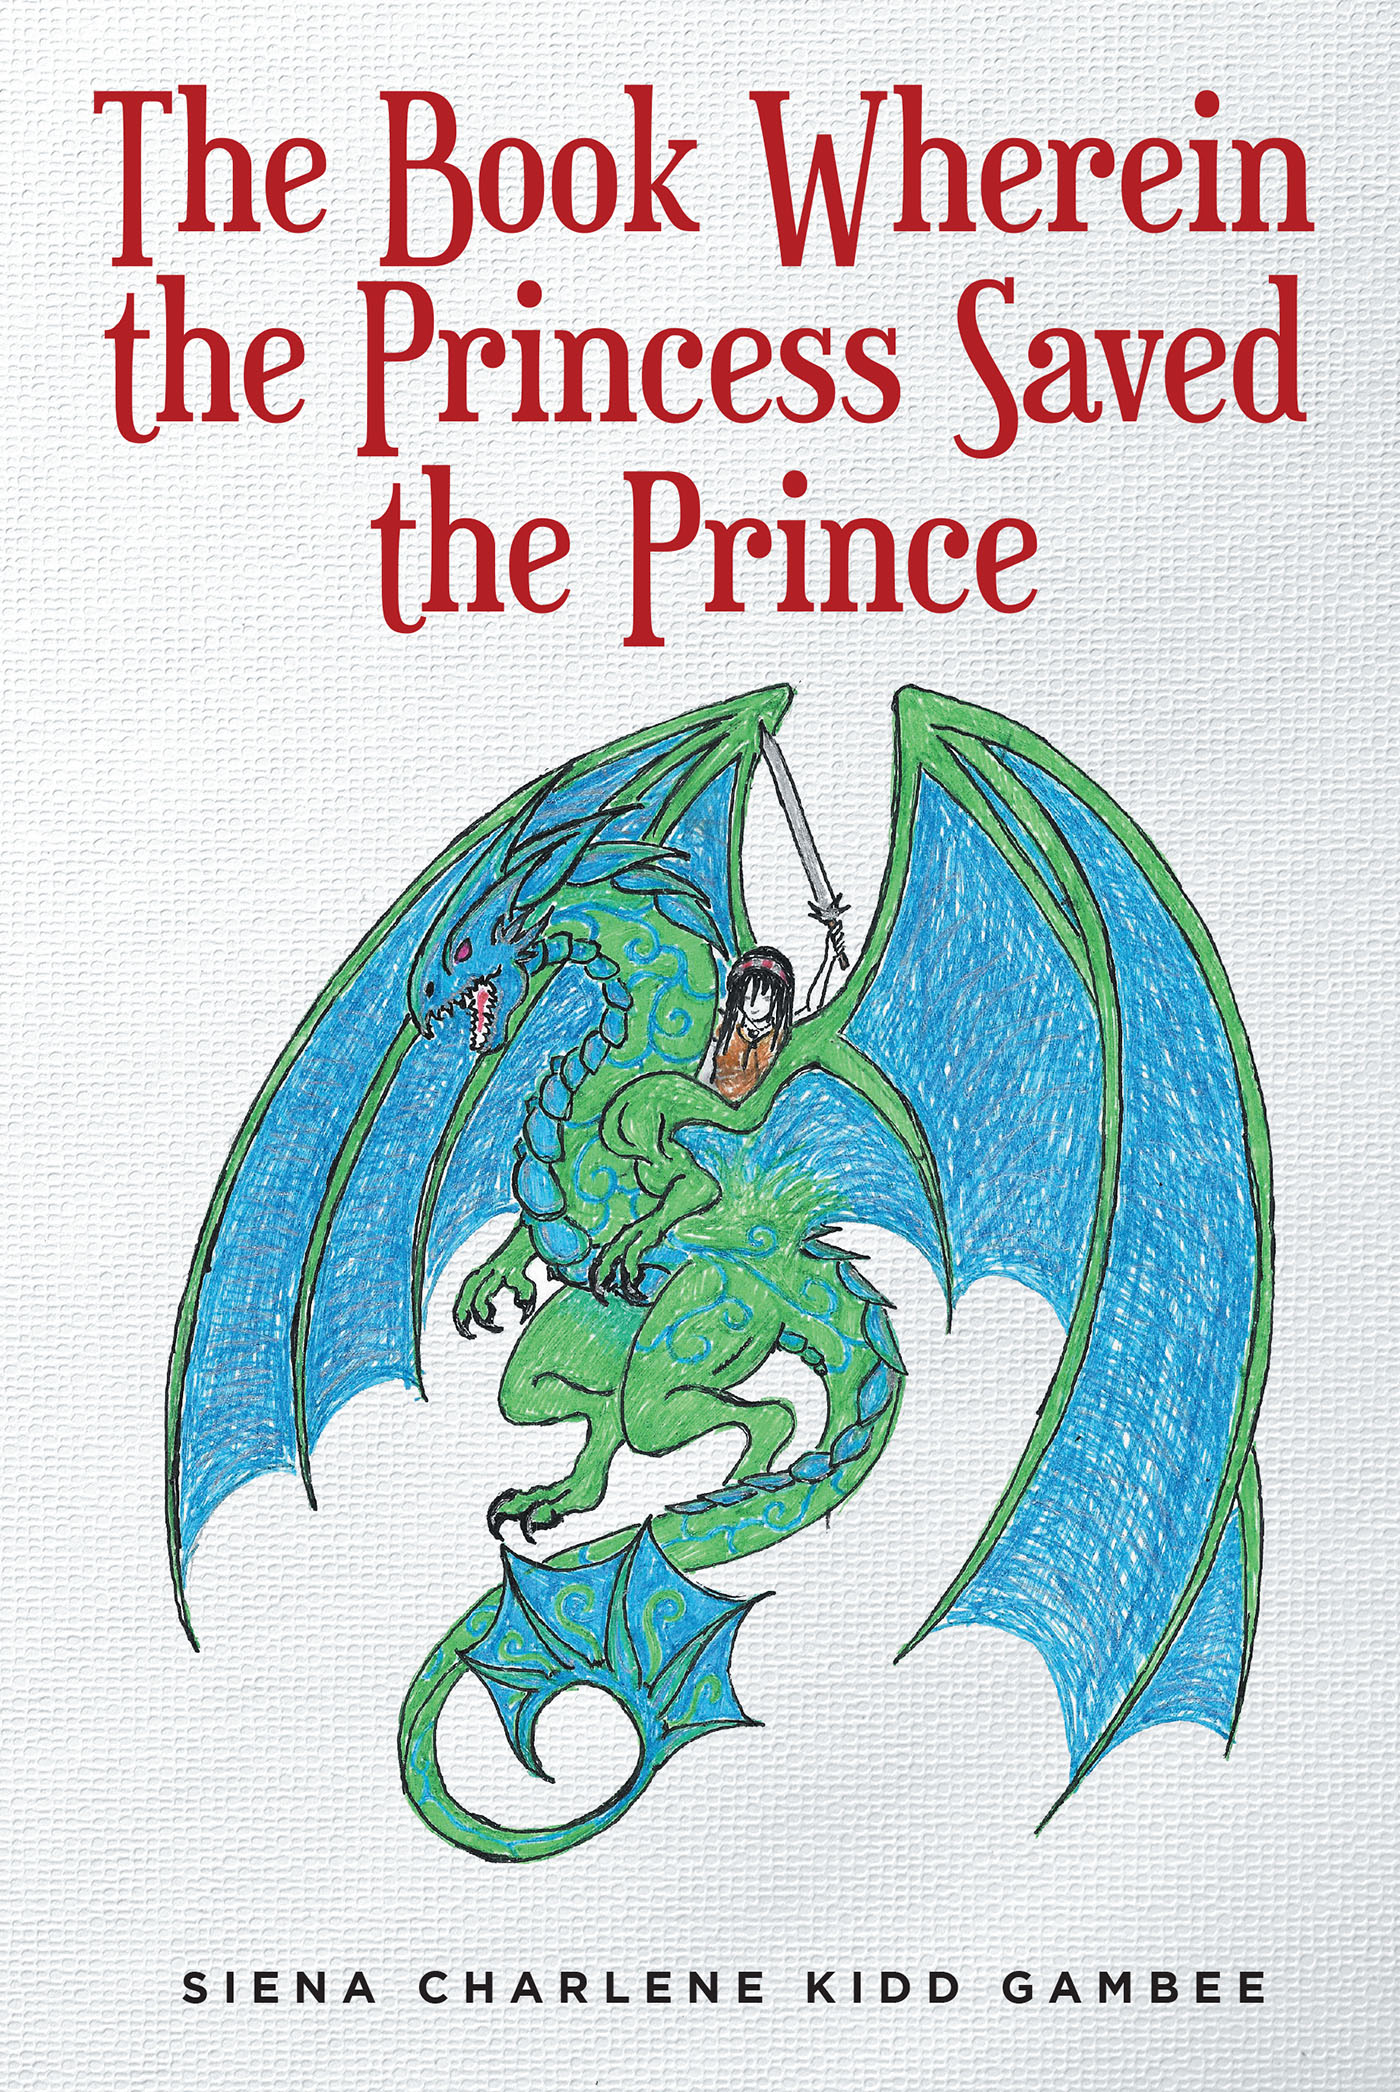 Siena Charlene Kidd Gambee’s New Book, "The Book Wherein the Princess Saved the Prince," is a Delightful and Unique Twist on a Classic Fairy Tale Trope